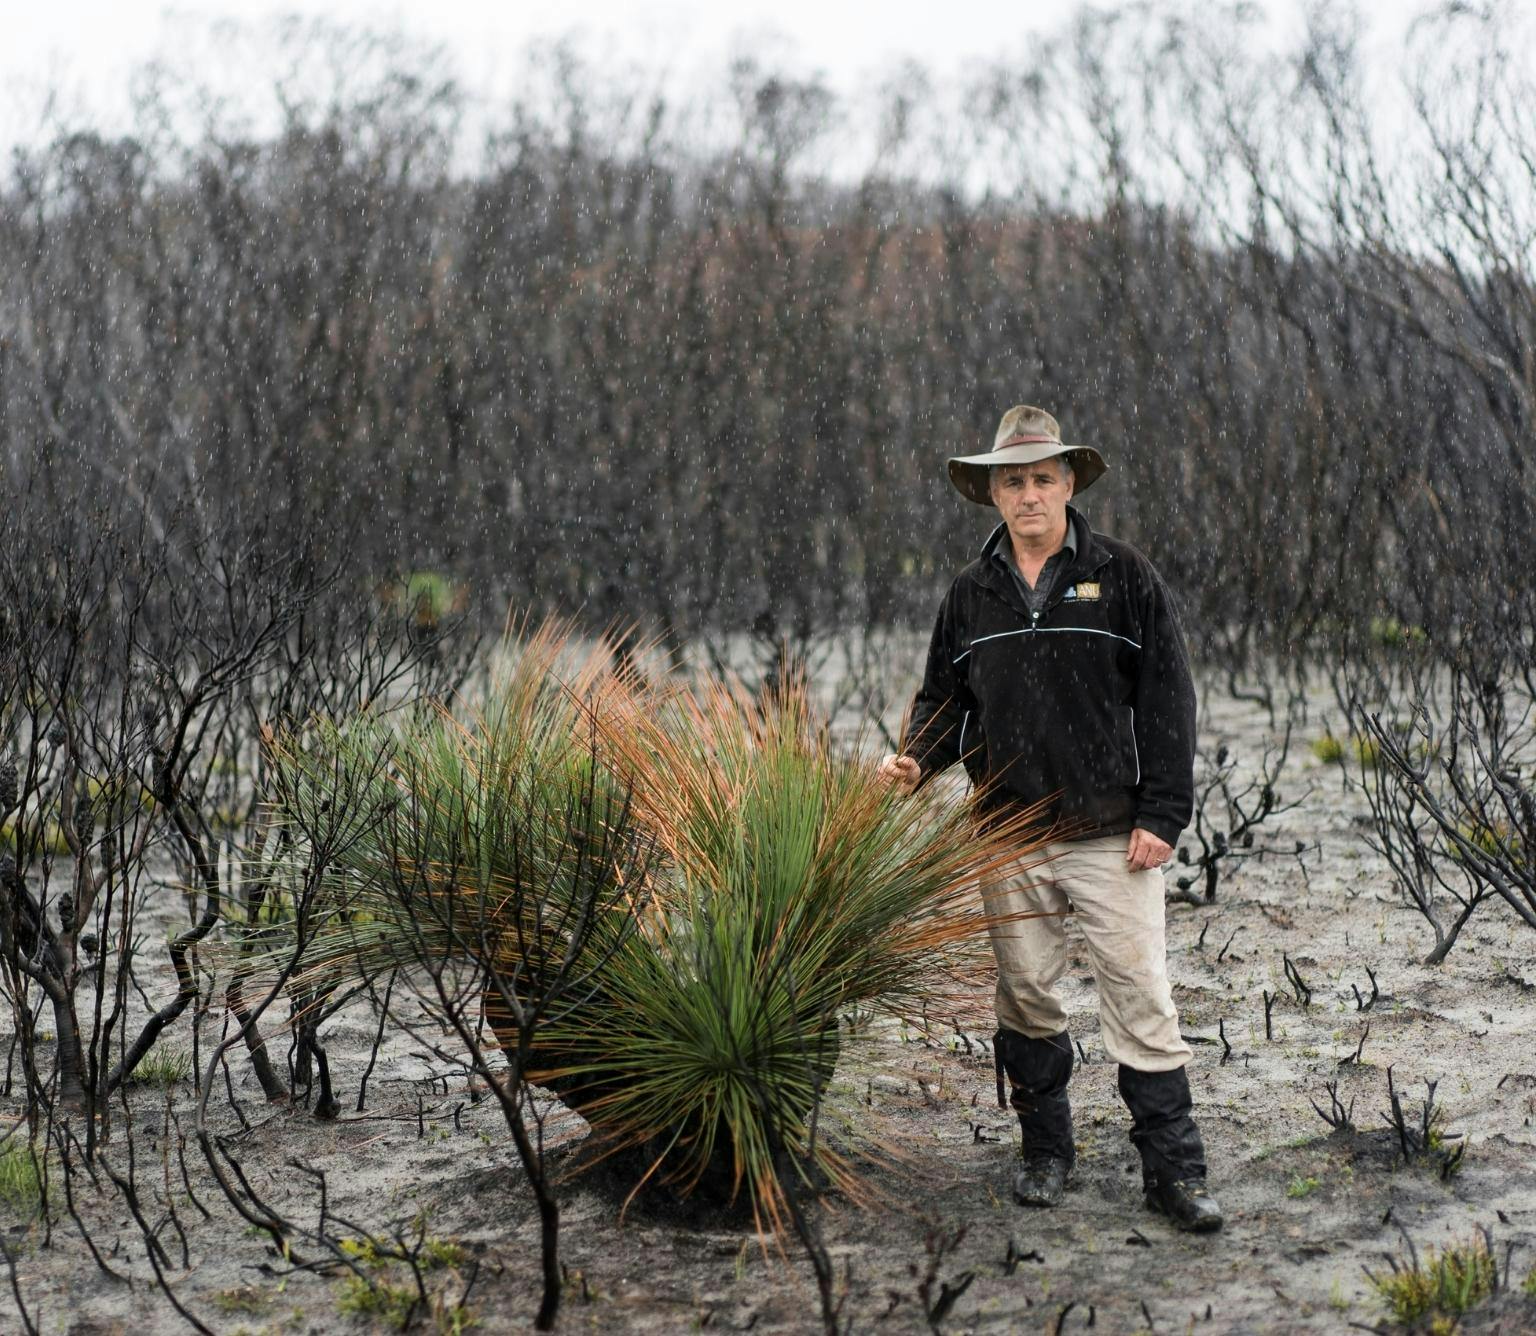 David Lindenmayer is wearing a black jumper, a broad brimmed hat and beige pants. He is standing next to a green spiky shrub. He is surrounded by black burnt trees and grey earth.